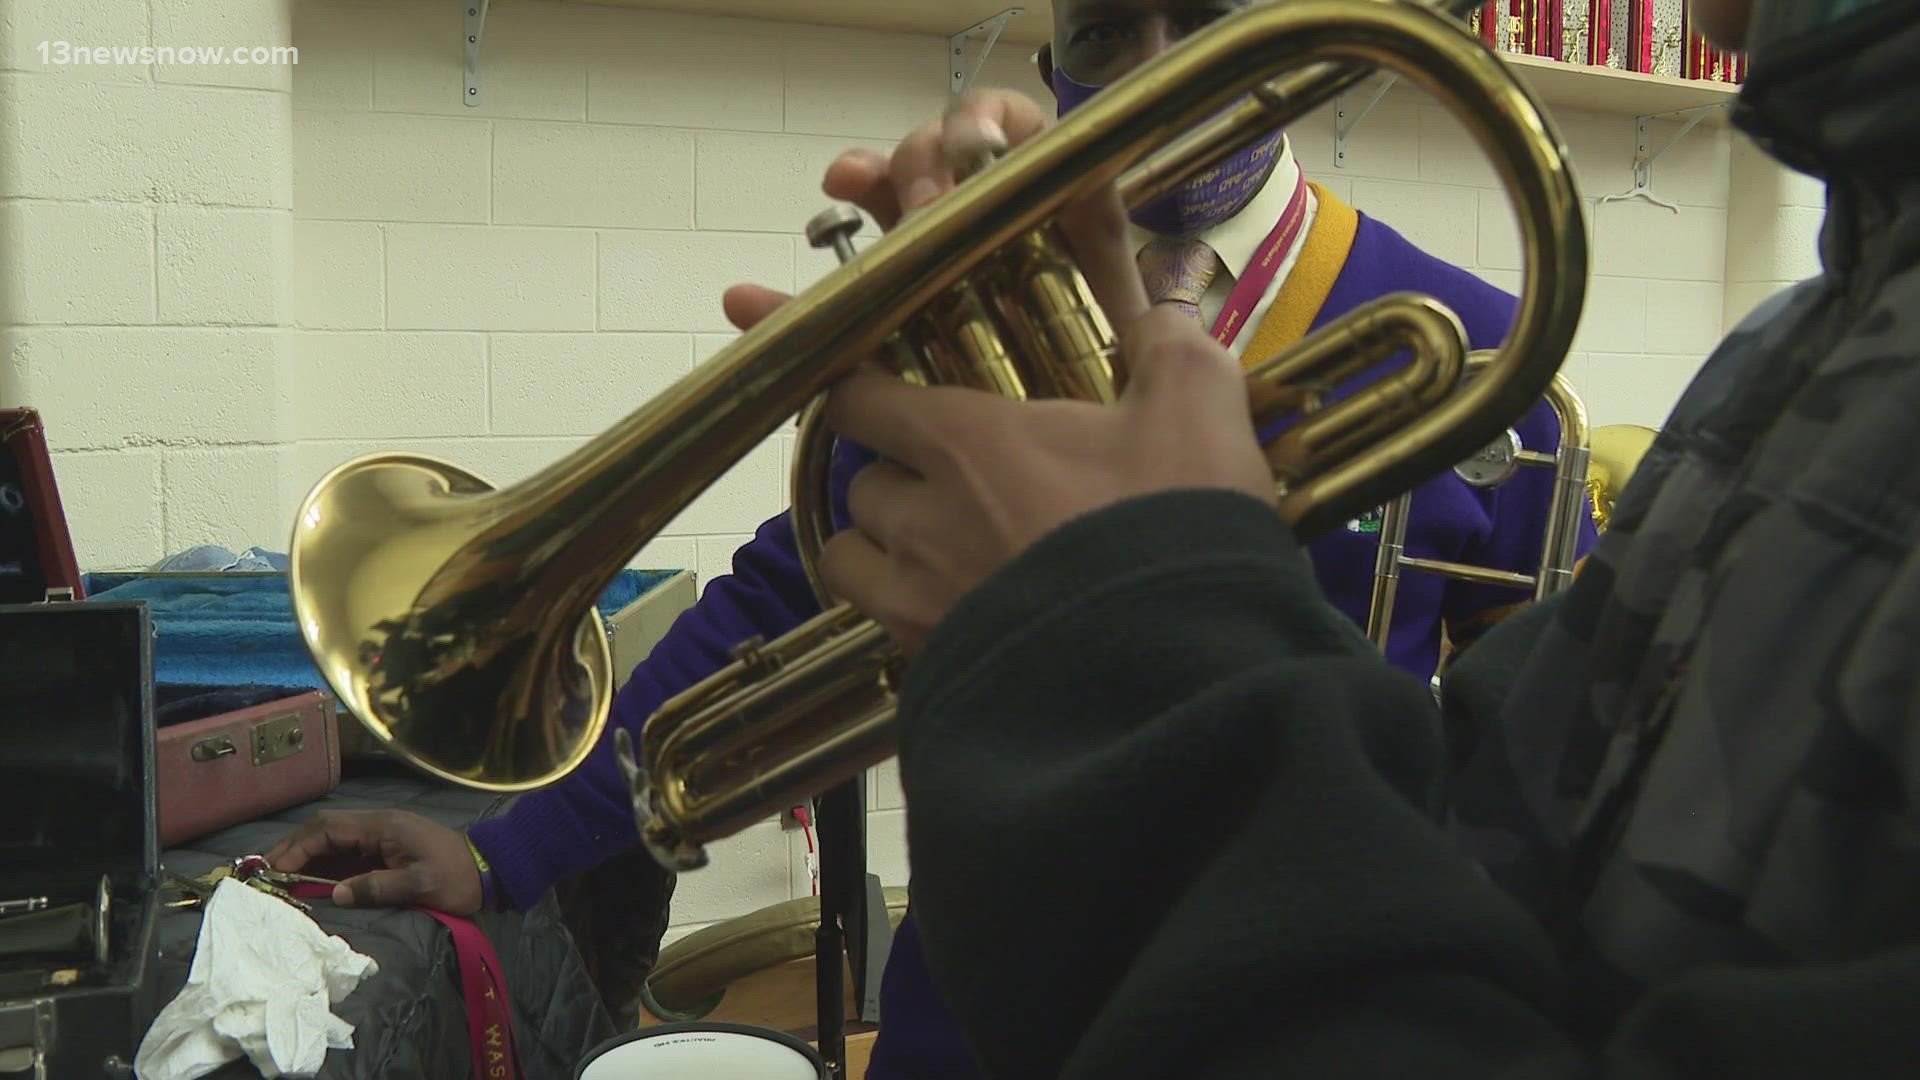 Jay Lang is bringing jazz lovers together for nights of experiences for music students in Norfolk.